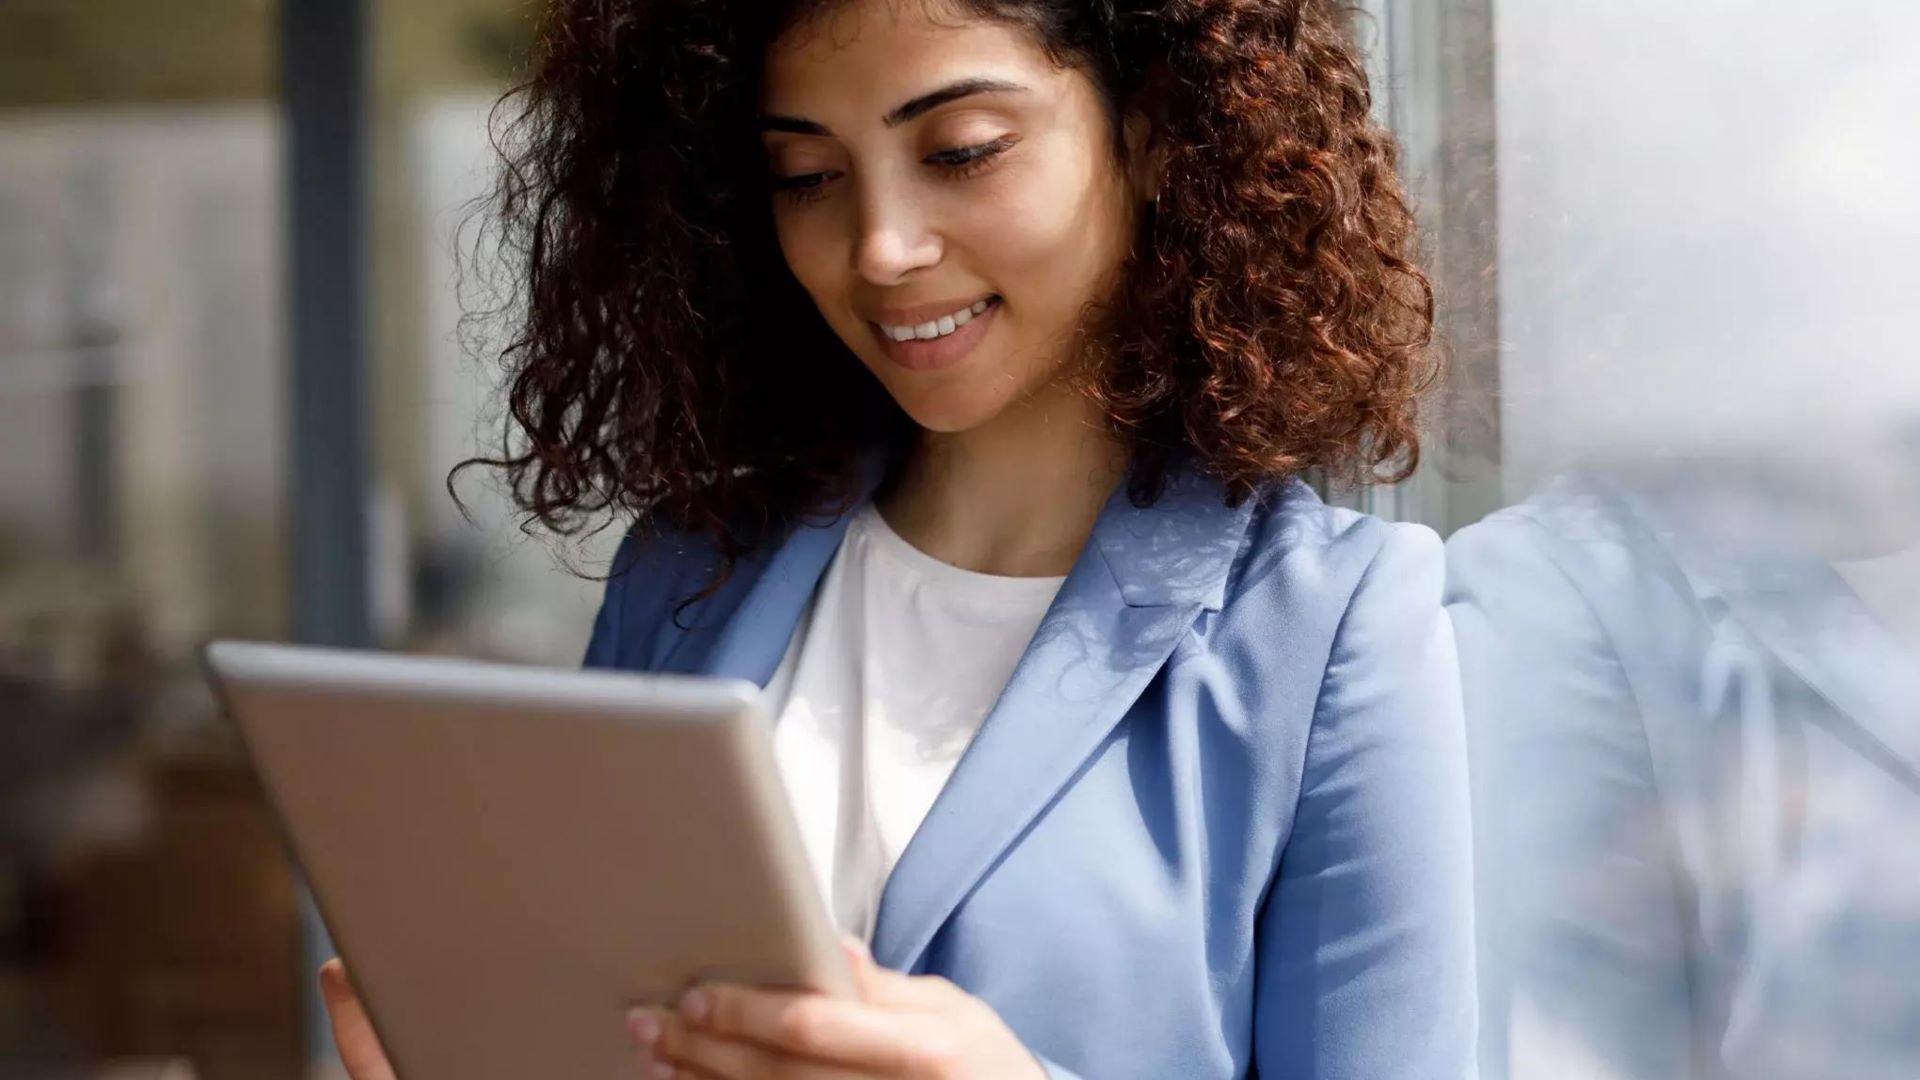 Woman in light blue blazer smiling behind a tablet